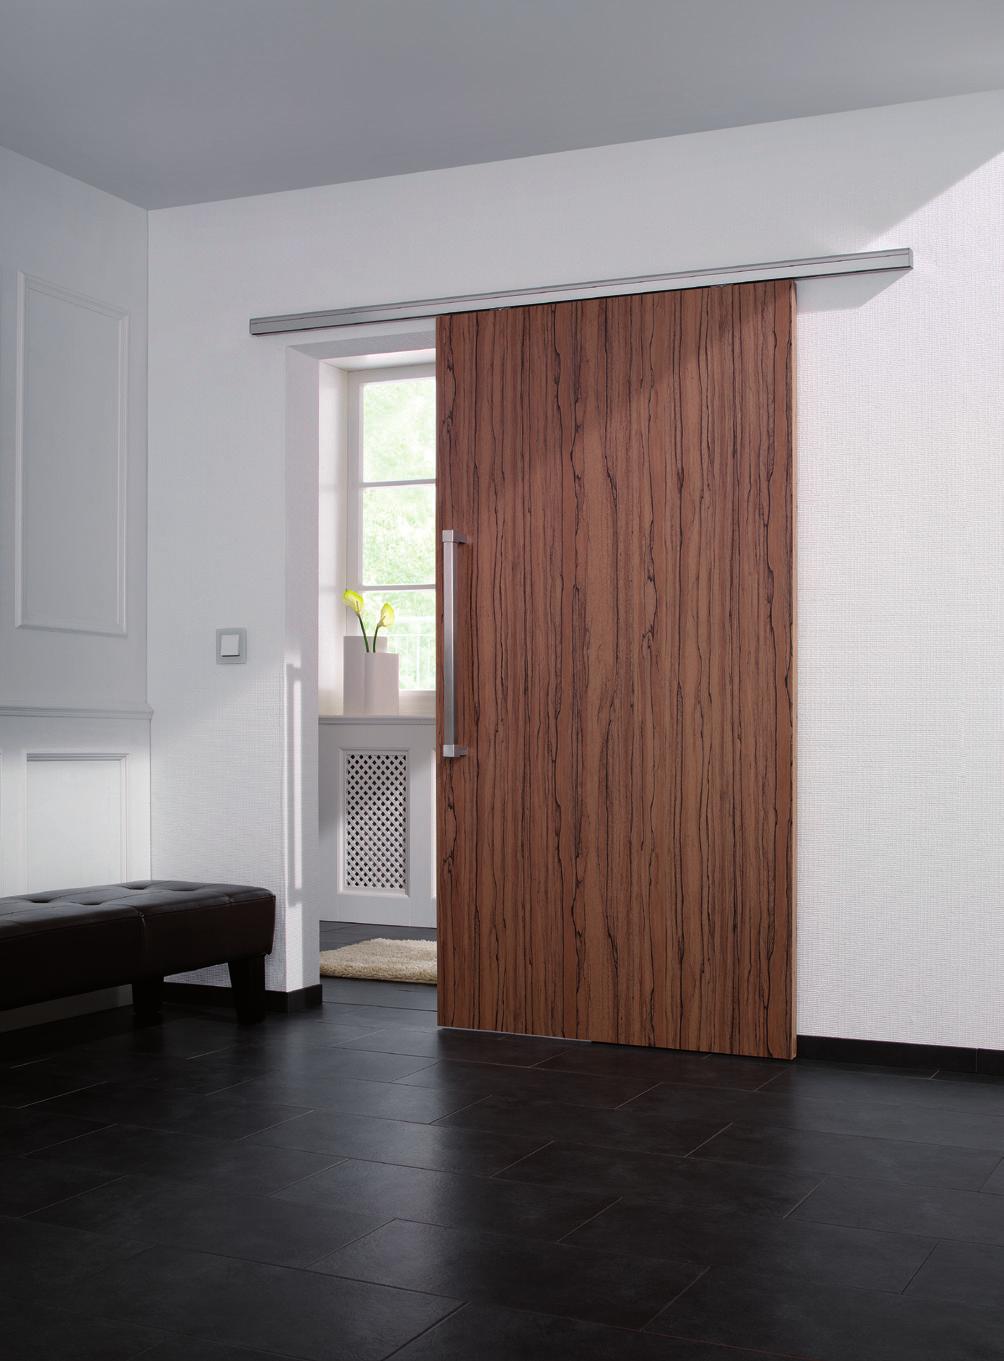 Regardless of whether they are used to separate kitchen areas, walk-in wardrobes or as part of office partitions, the possibilities are numerous, and therefore so are the range of corresponding